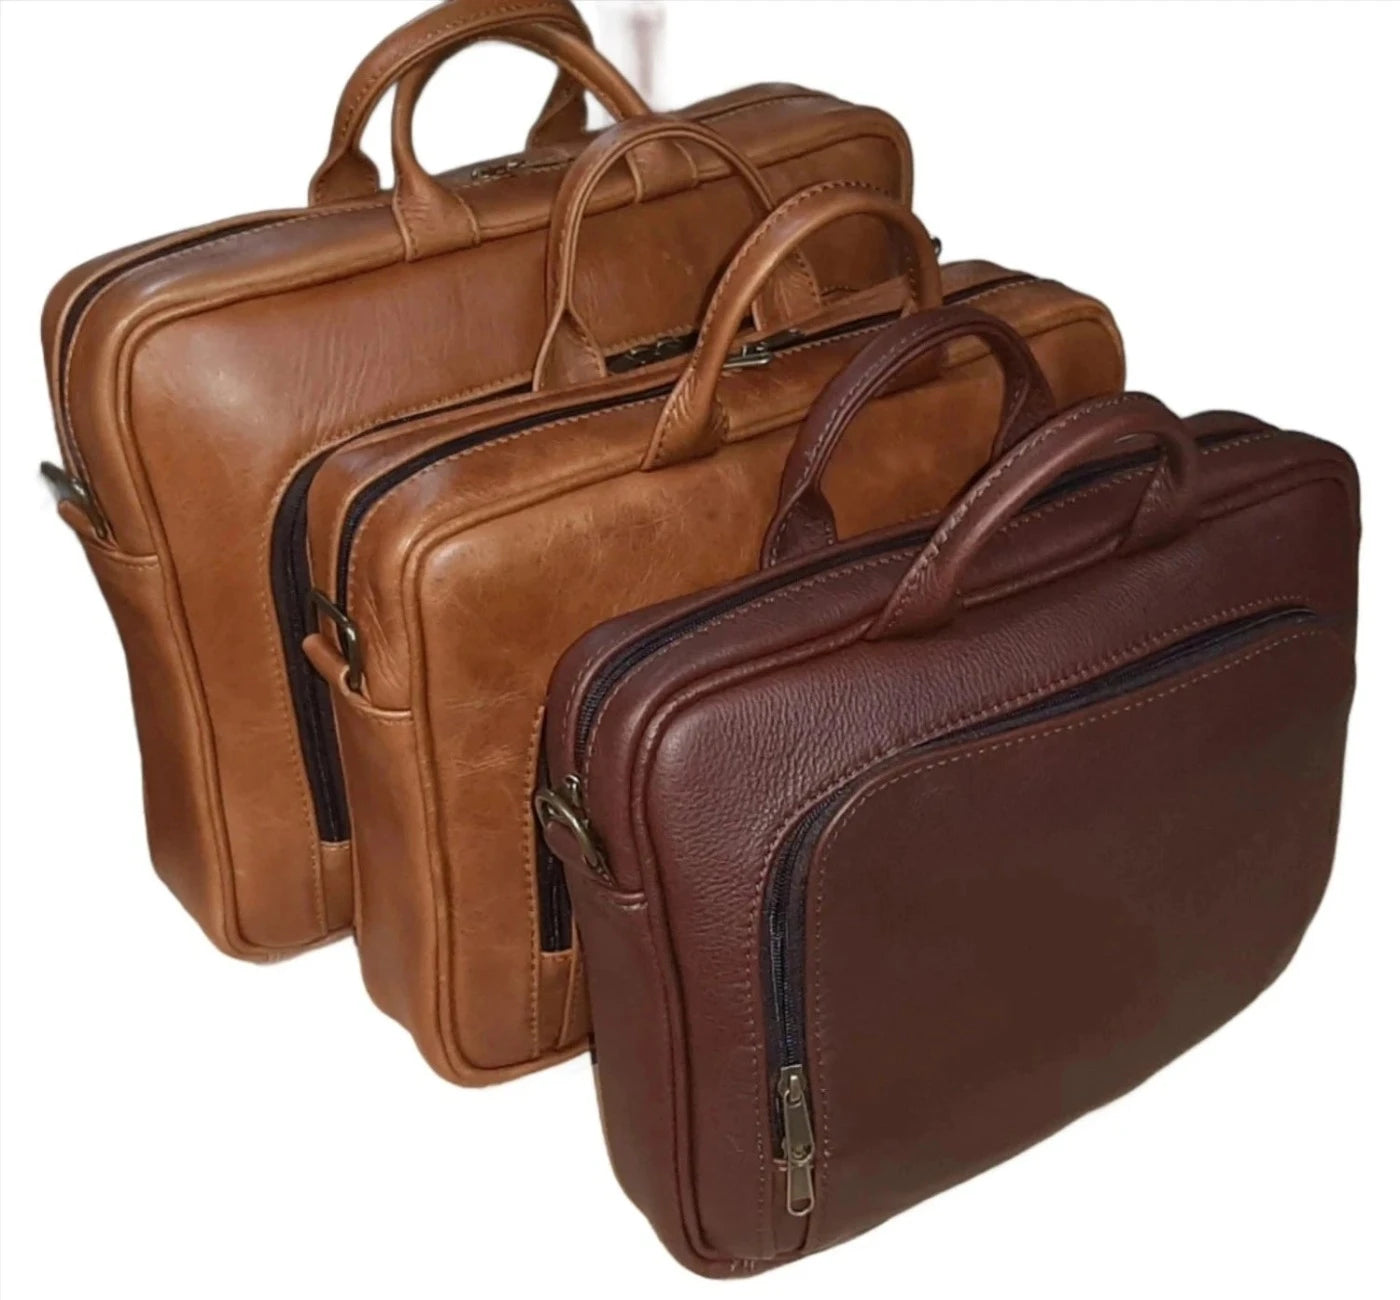 Iconic 12inch 14inch & 15inch laptop briefcase - Light tan & oxblood on thc desk at Cape Masai Leather Workshop